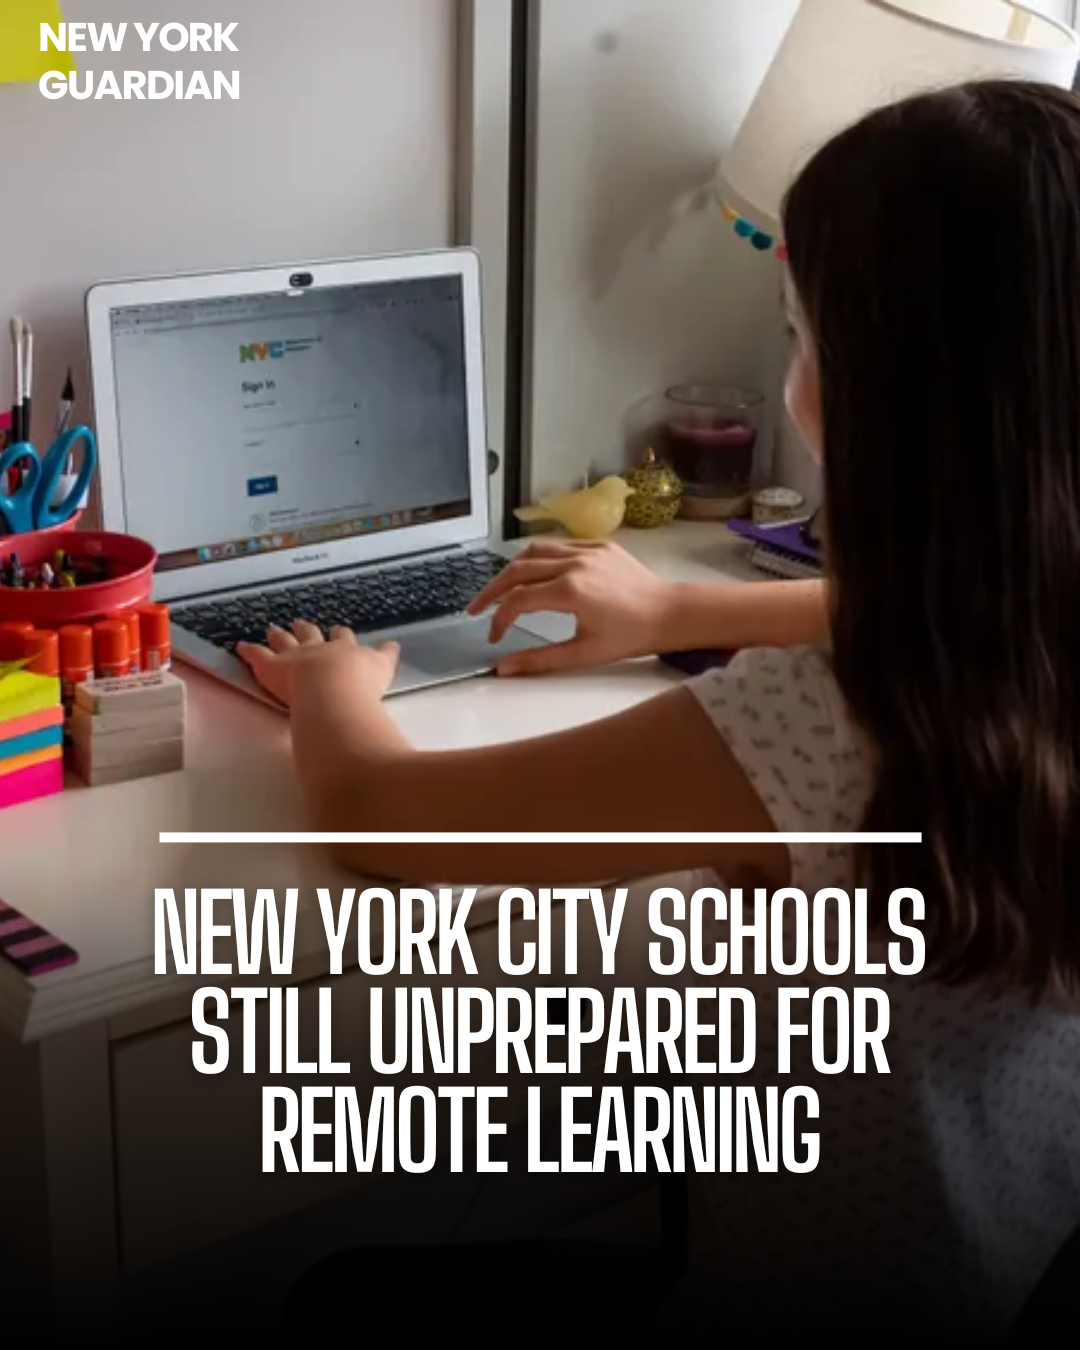 The largest school system in New York City returned to remote learning about a month after a February snowfall.